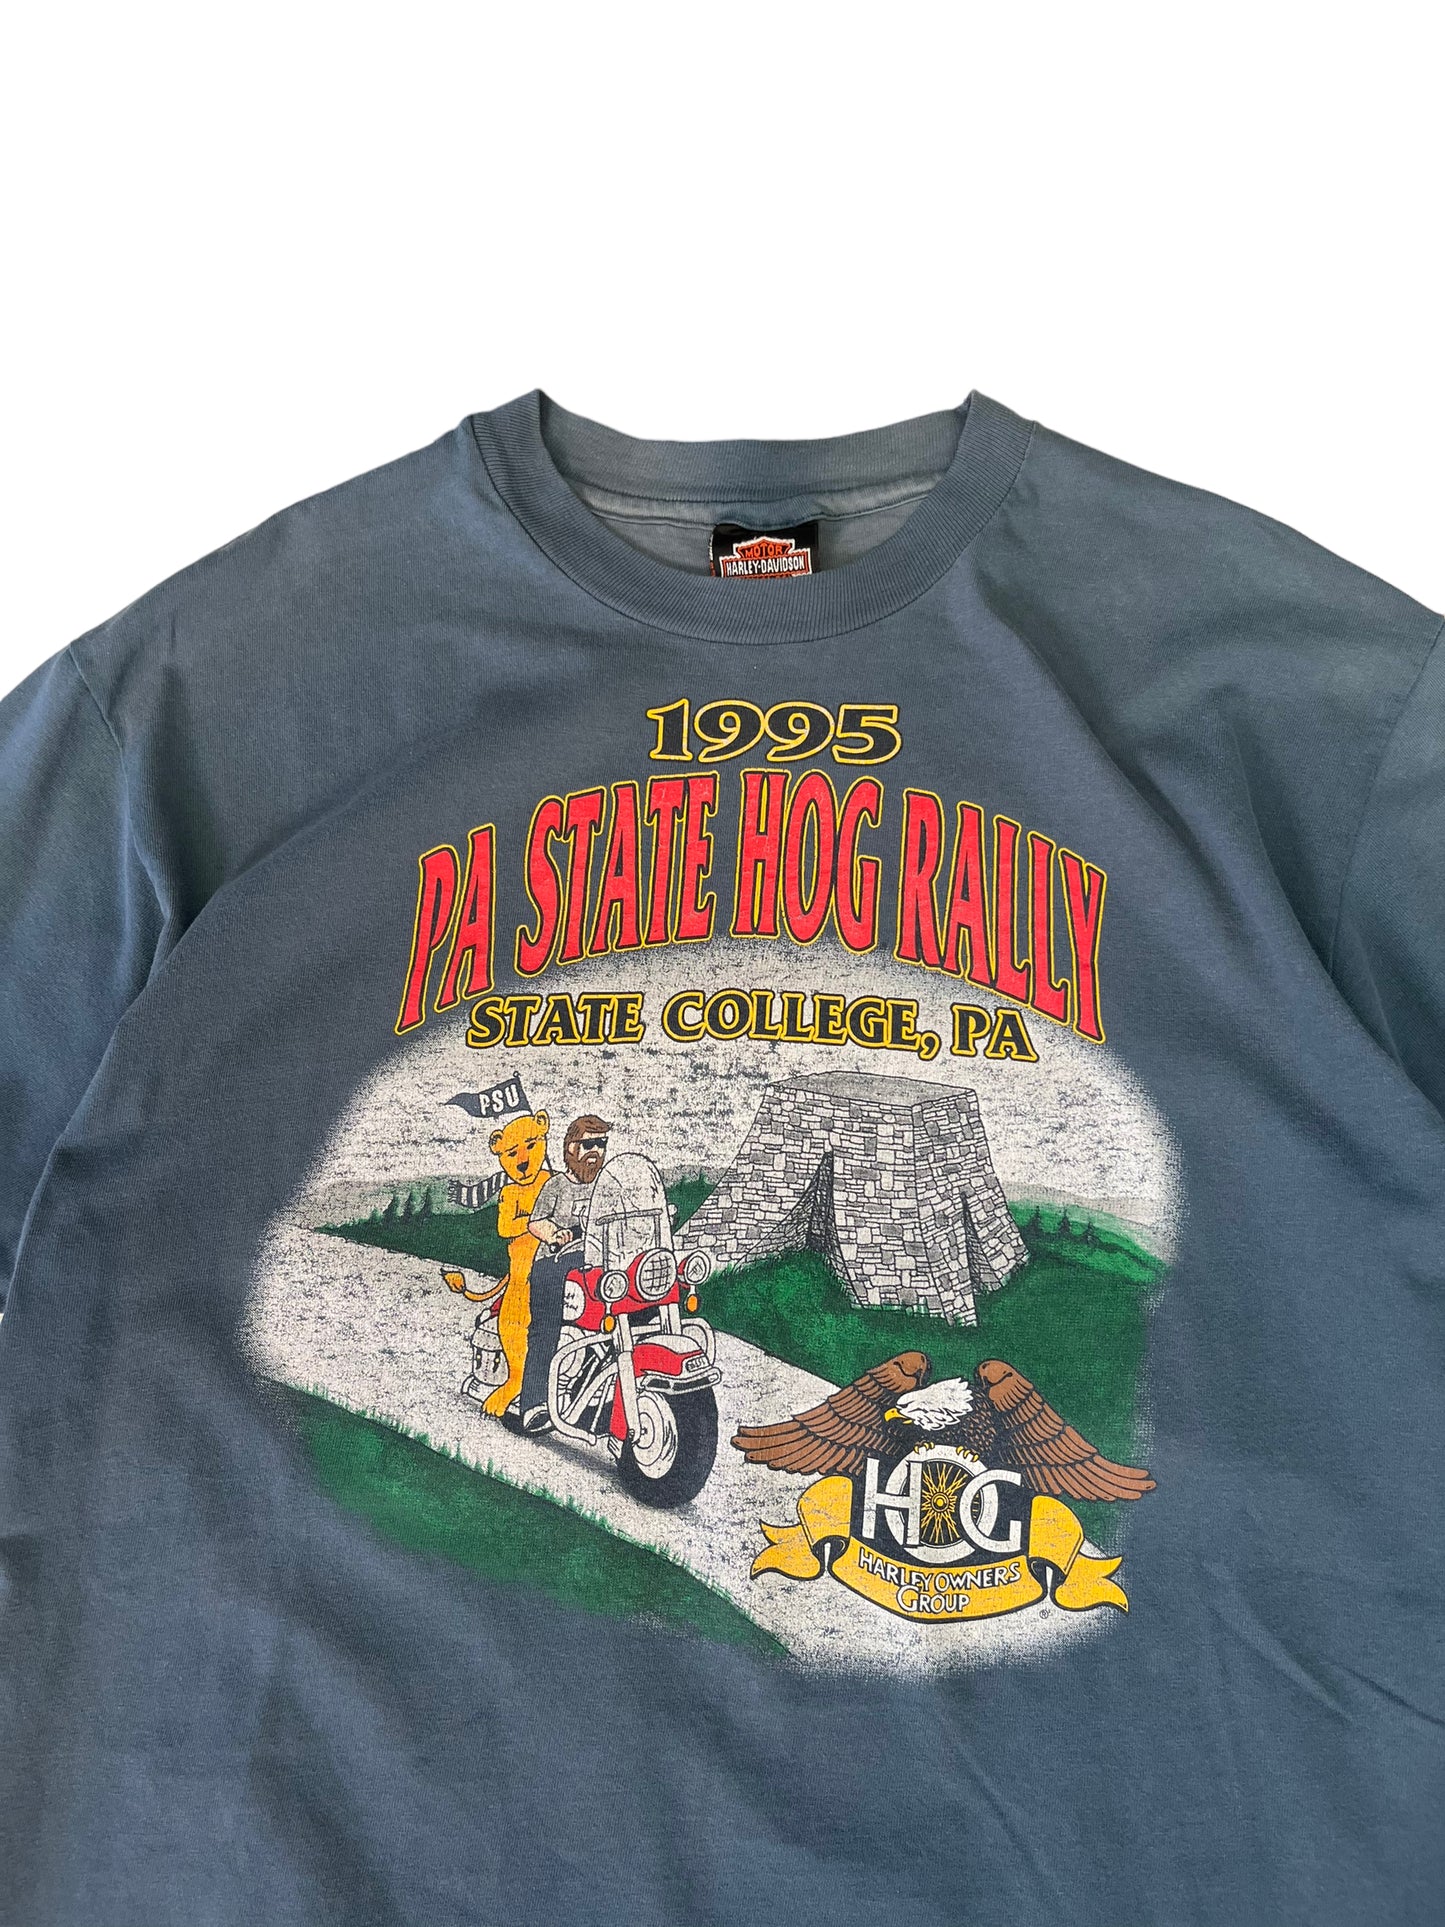 (L) 1995 Harley Davidson Penn State Double Sided Tee